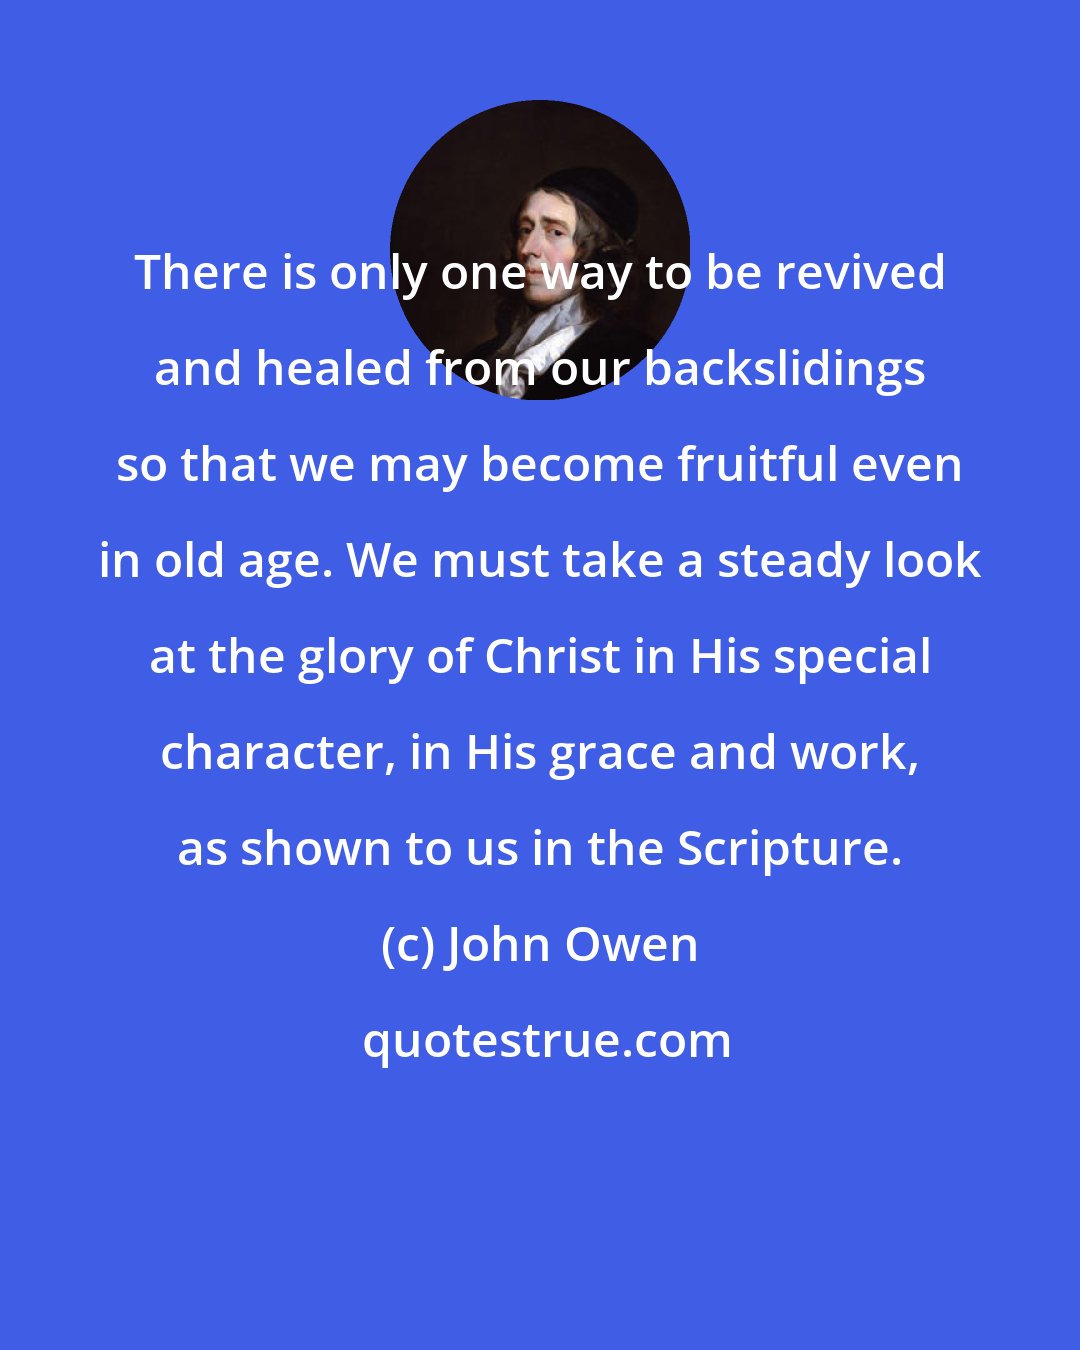 John Owen: There is only one way to be revived and healed from our backslidings so that we may become fruitful even in old age. We must take a steady look at the glory of Christ in His special character, in His grace and work, as shown to us in the Scripture.